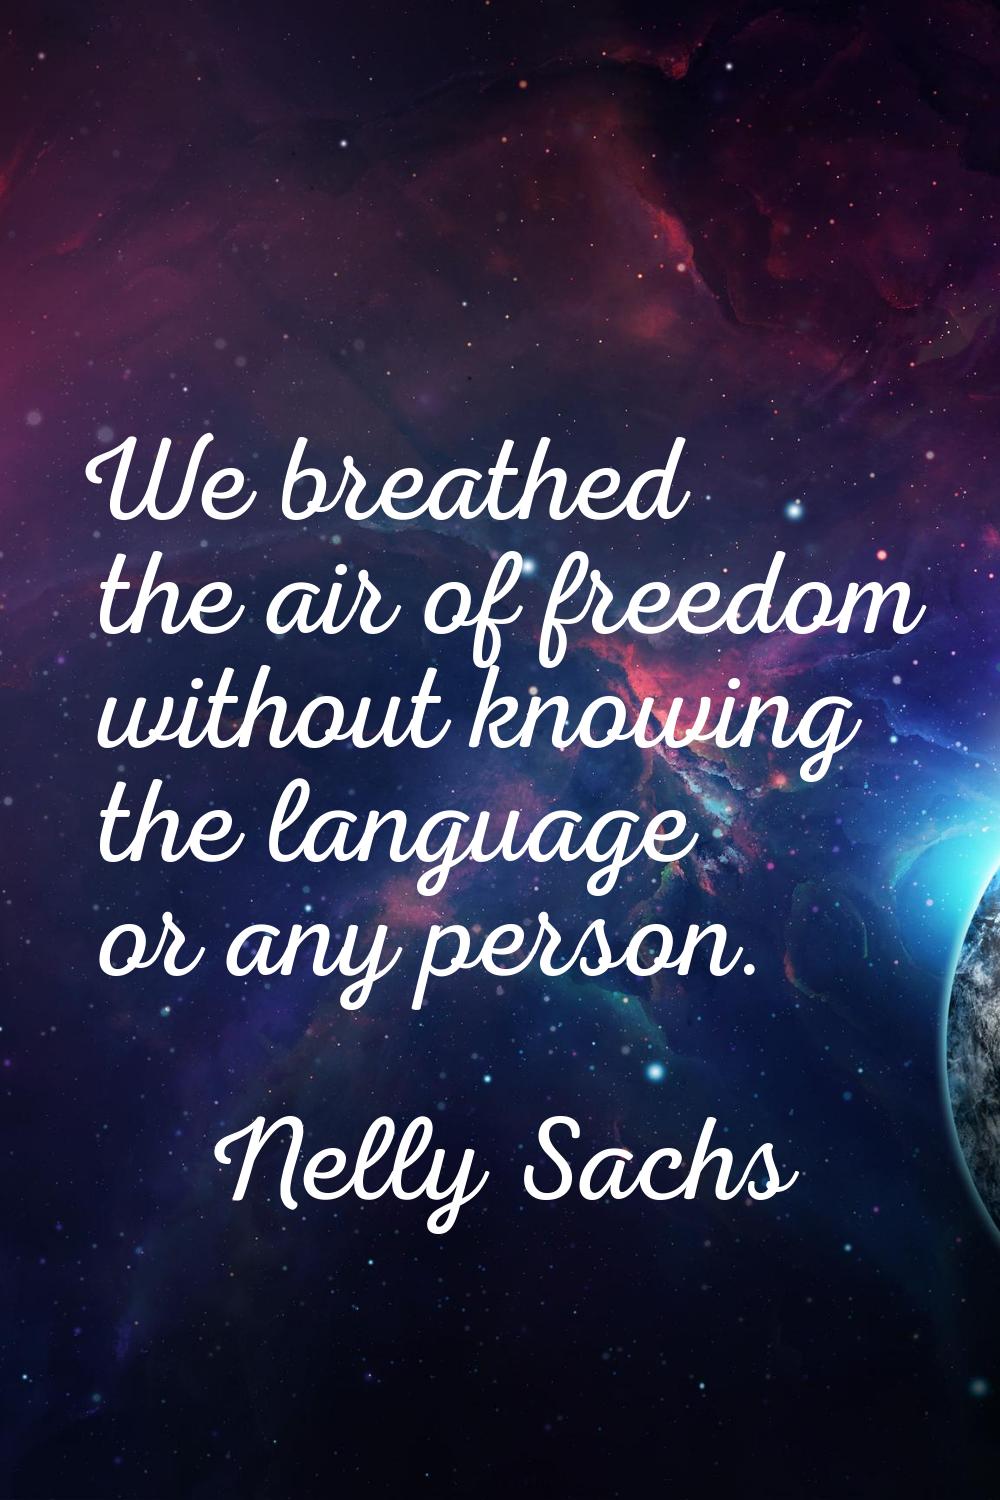 We breathed the air of freedom without knowing the language or any person.